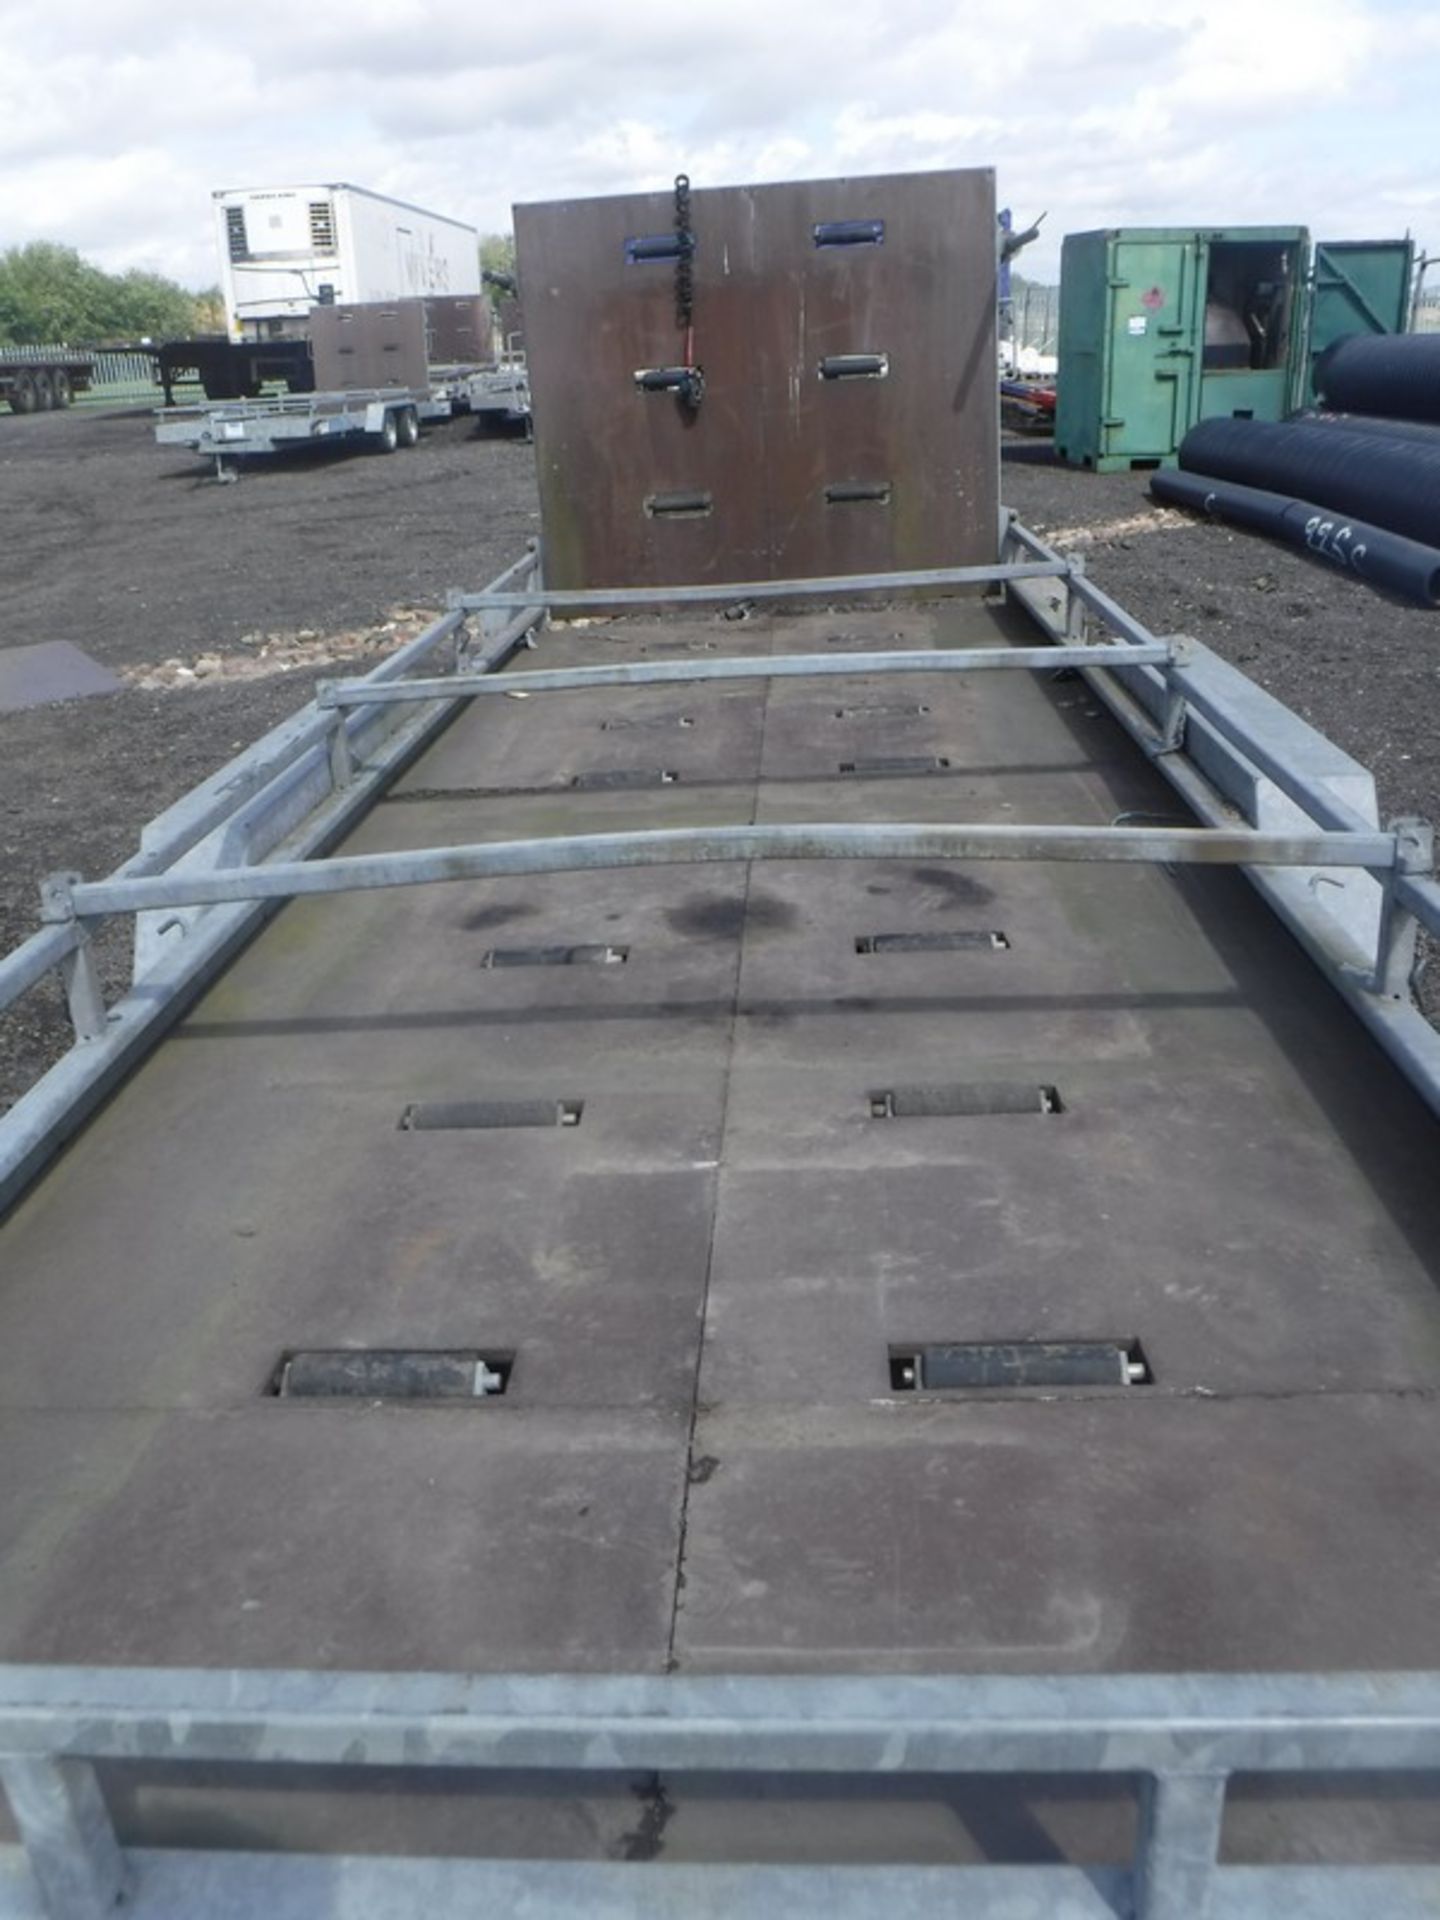 2003 WESTERN TRAILERS 18' x 6' twin axle trailer c/w 5' ramp. Max gross weight 2000kg VIN G50014/11. - Image 12 of 12